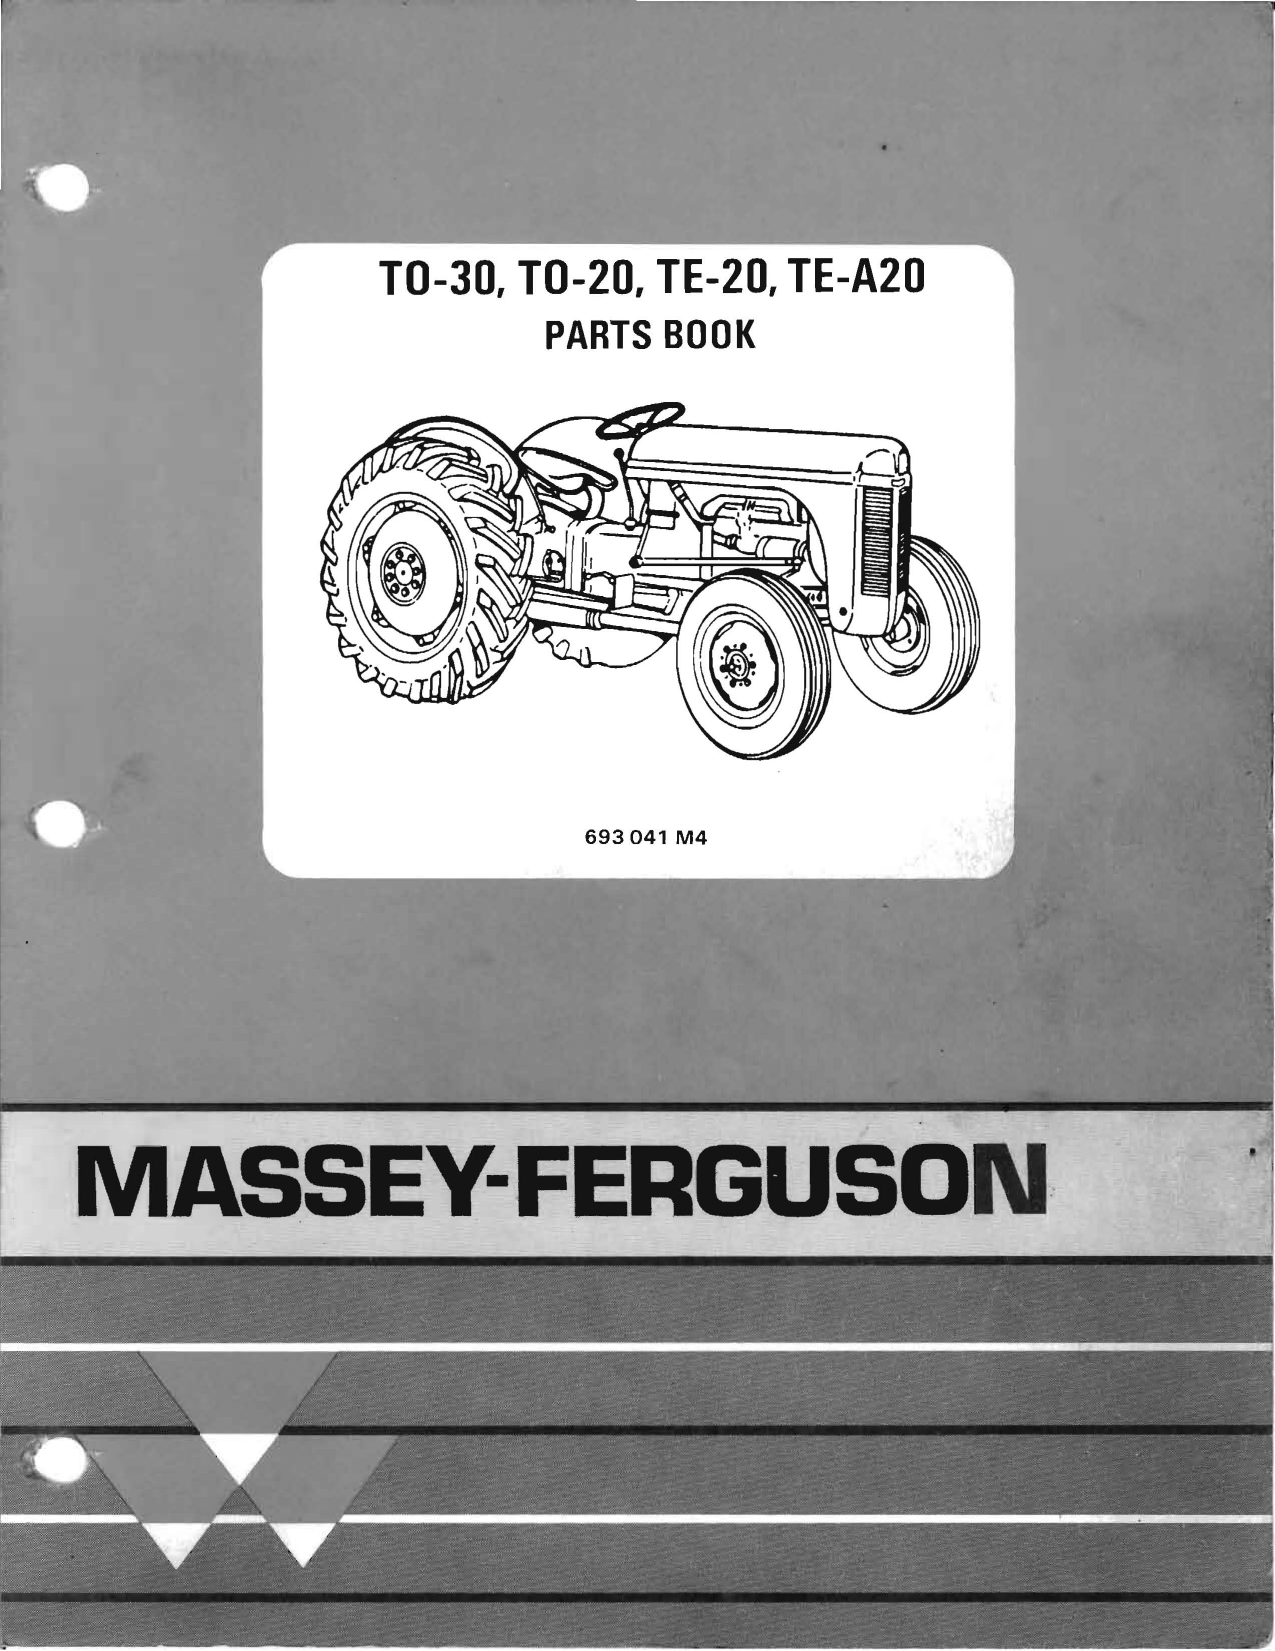 Massey Ferguson TO-30, TO-20, TE-20, TE-A20 parts book Preview image 1